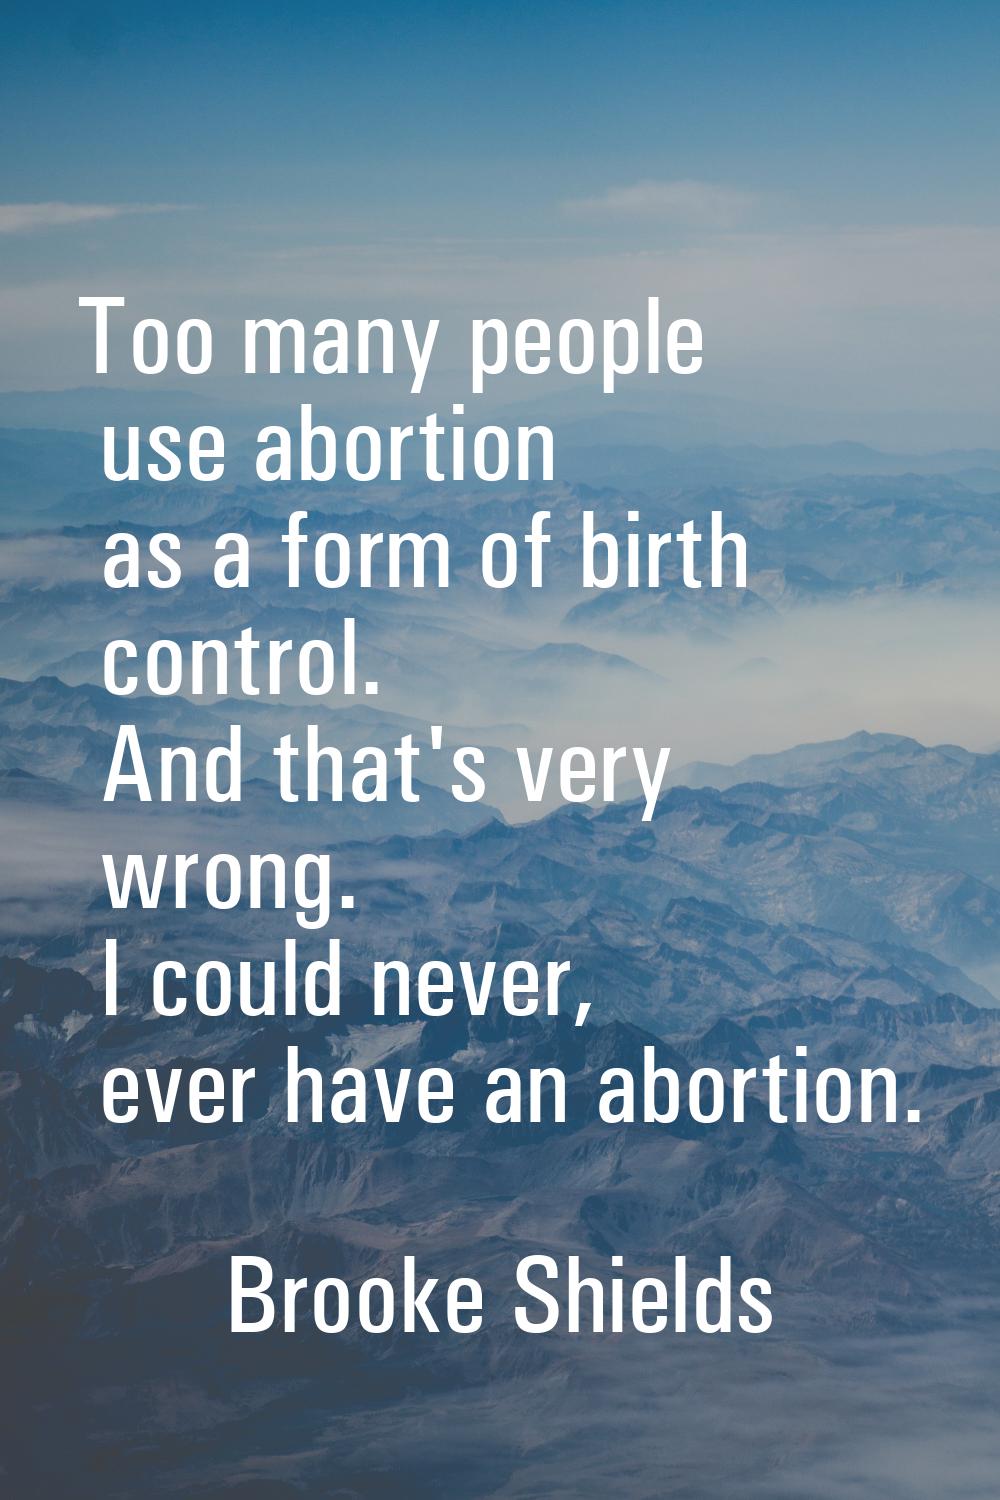 Too many people use abortion as a form of birth control. And that's very wrong. I could never, ever